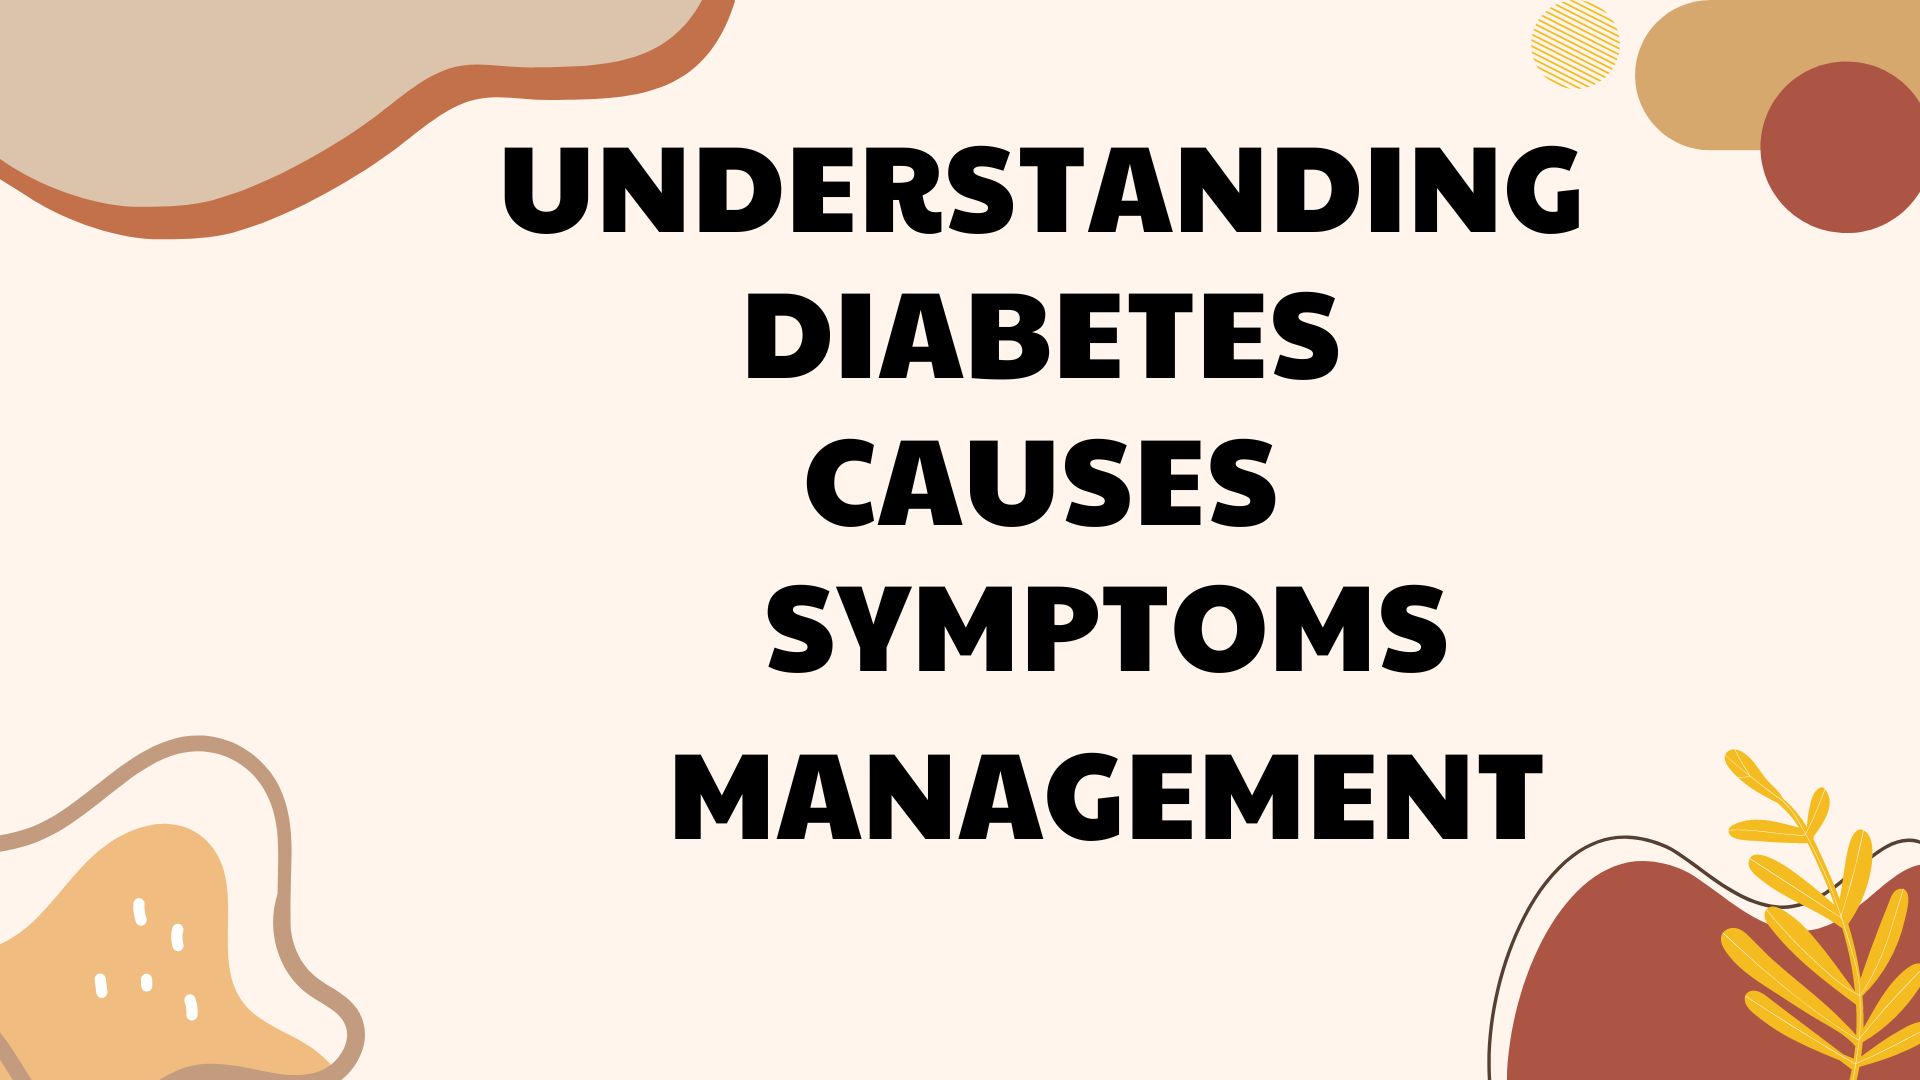 Understanding Diabetes: Causes, Symptoms, and Management